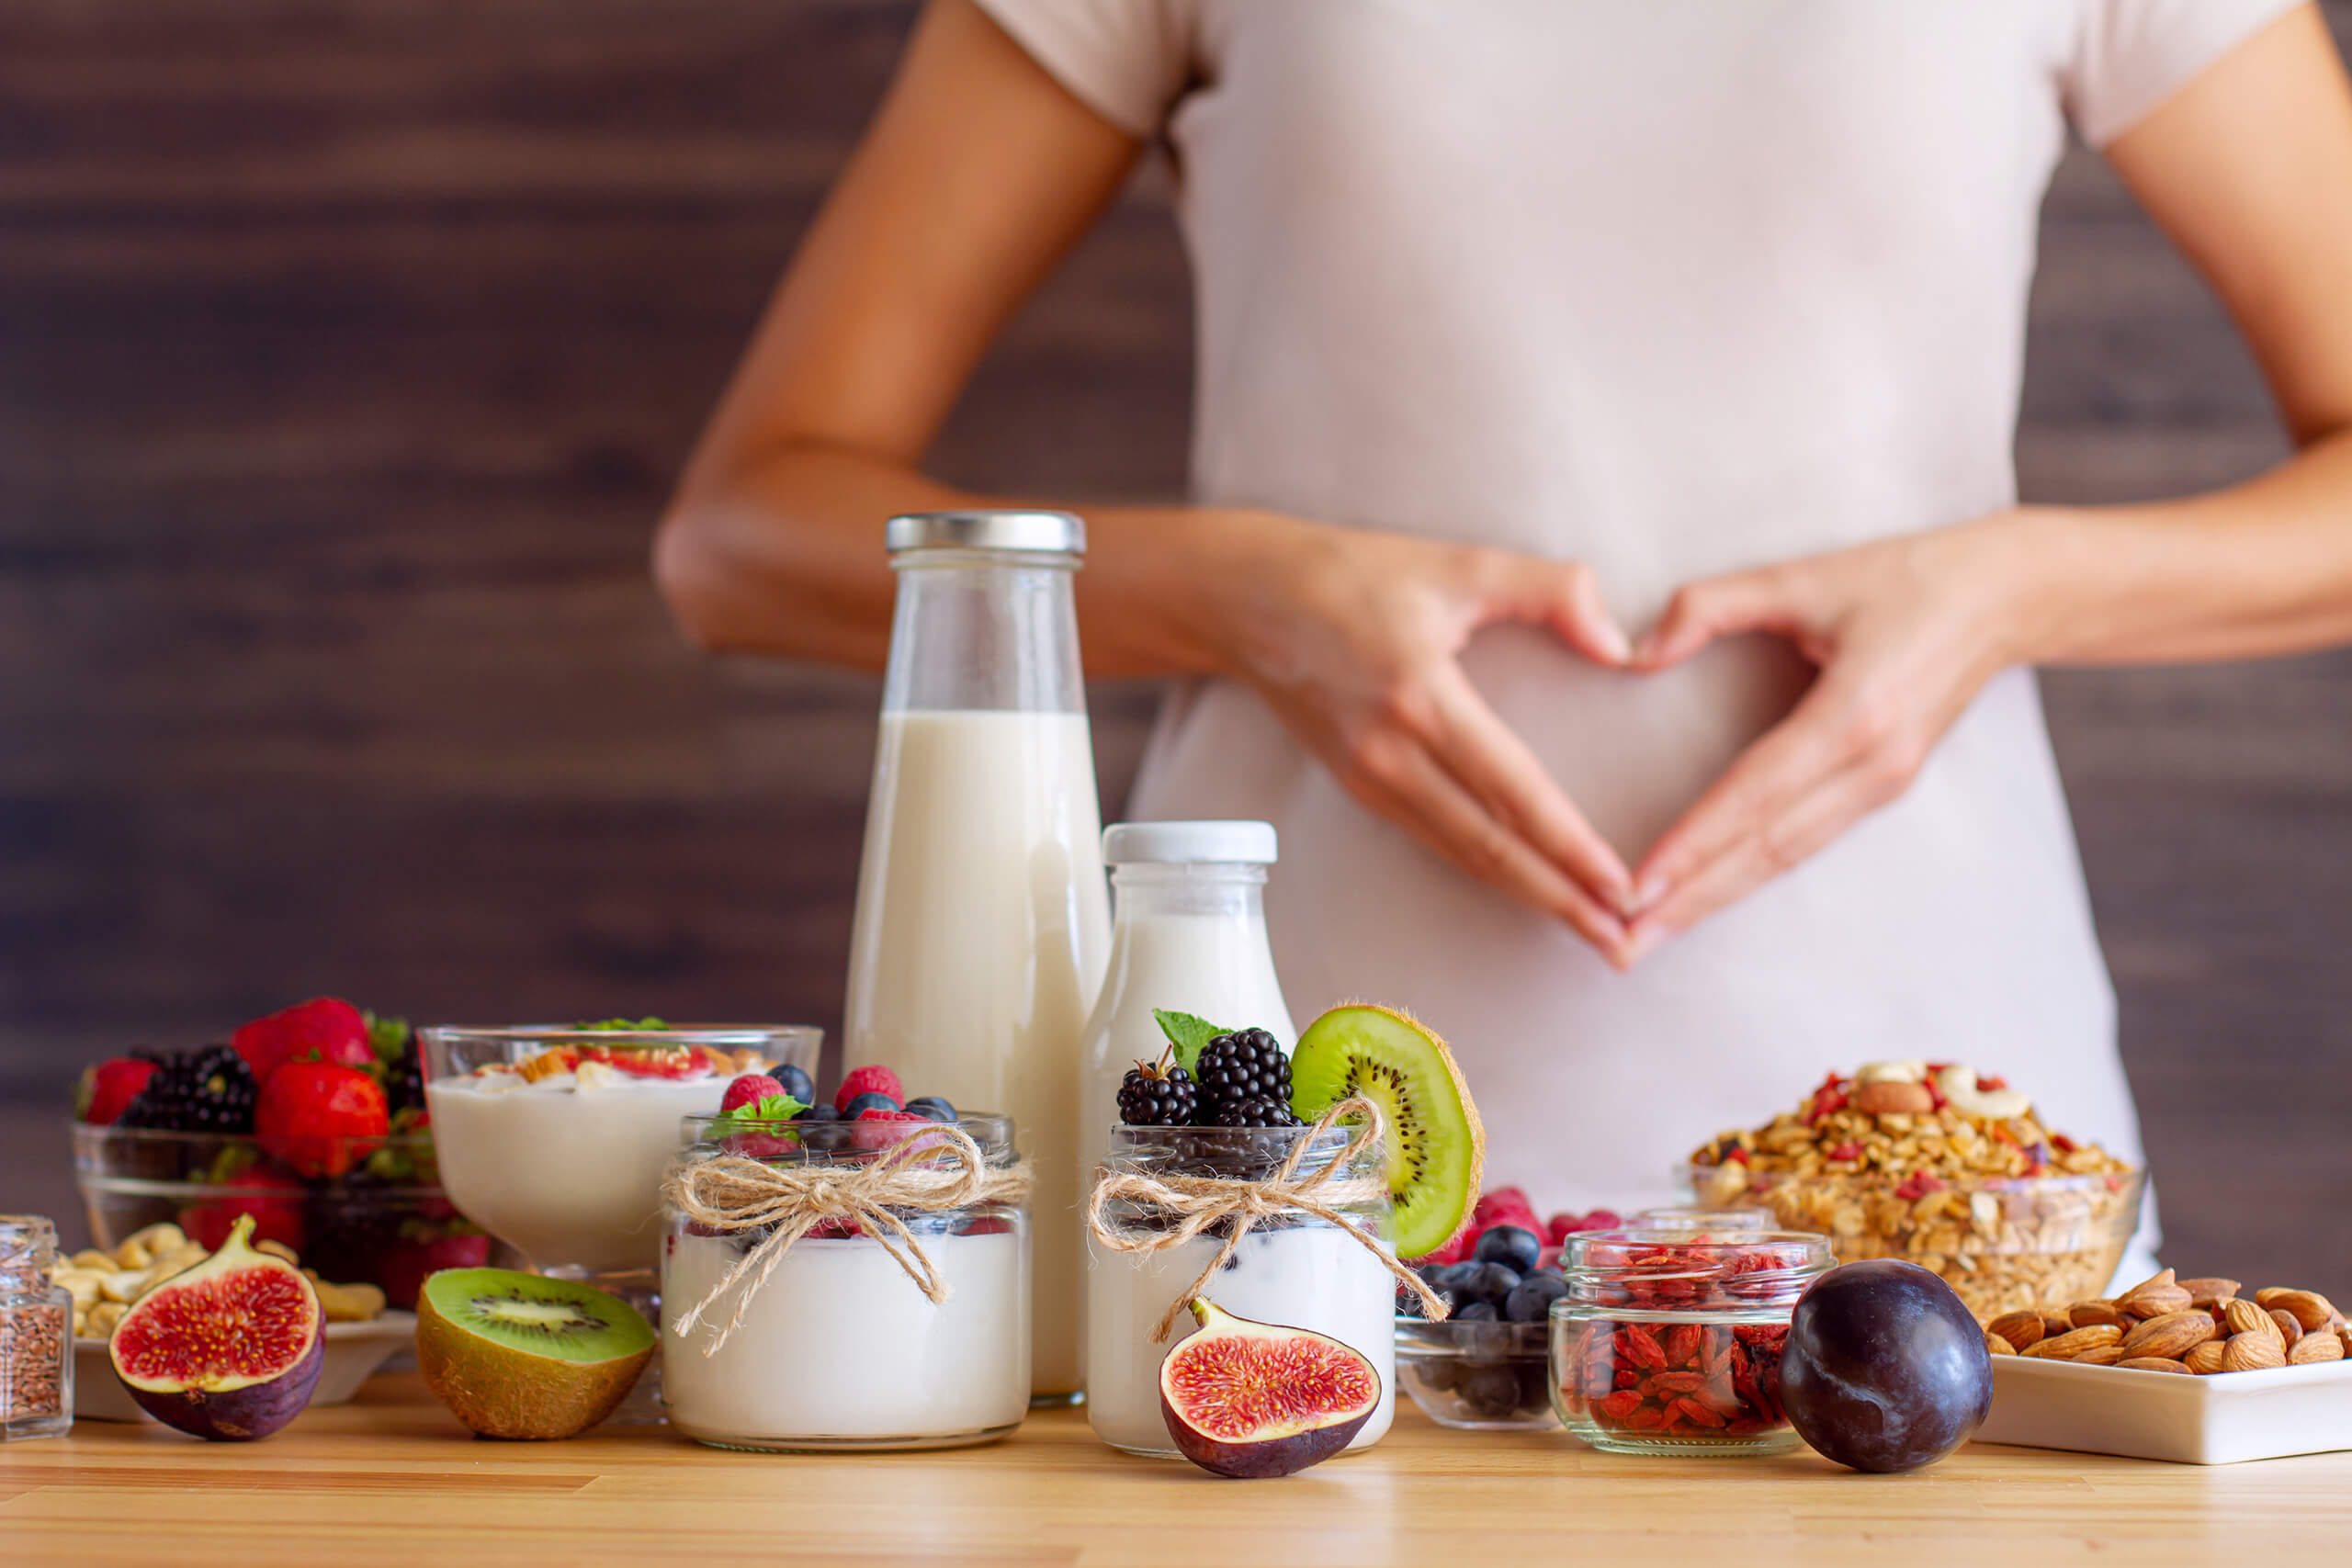 Female make shape of heart with her hands. Light summer breakfast with organic yogurts, fruits, berries and nuts. Nutrition that promotes good digestion and functioning of gastrointestinal tract.